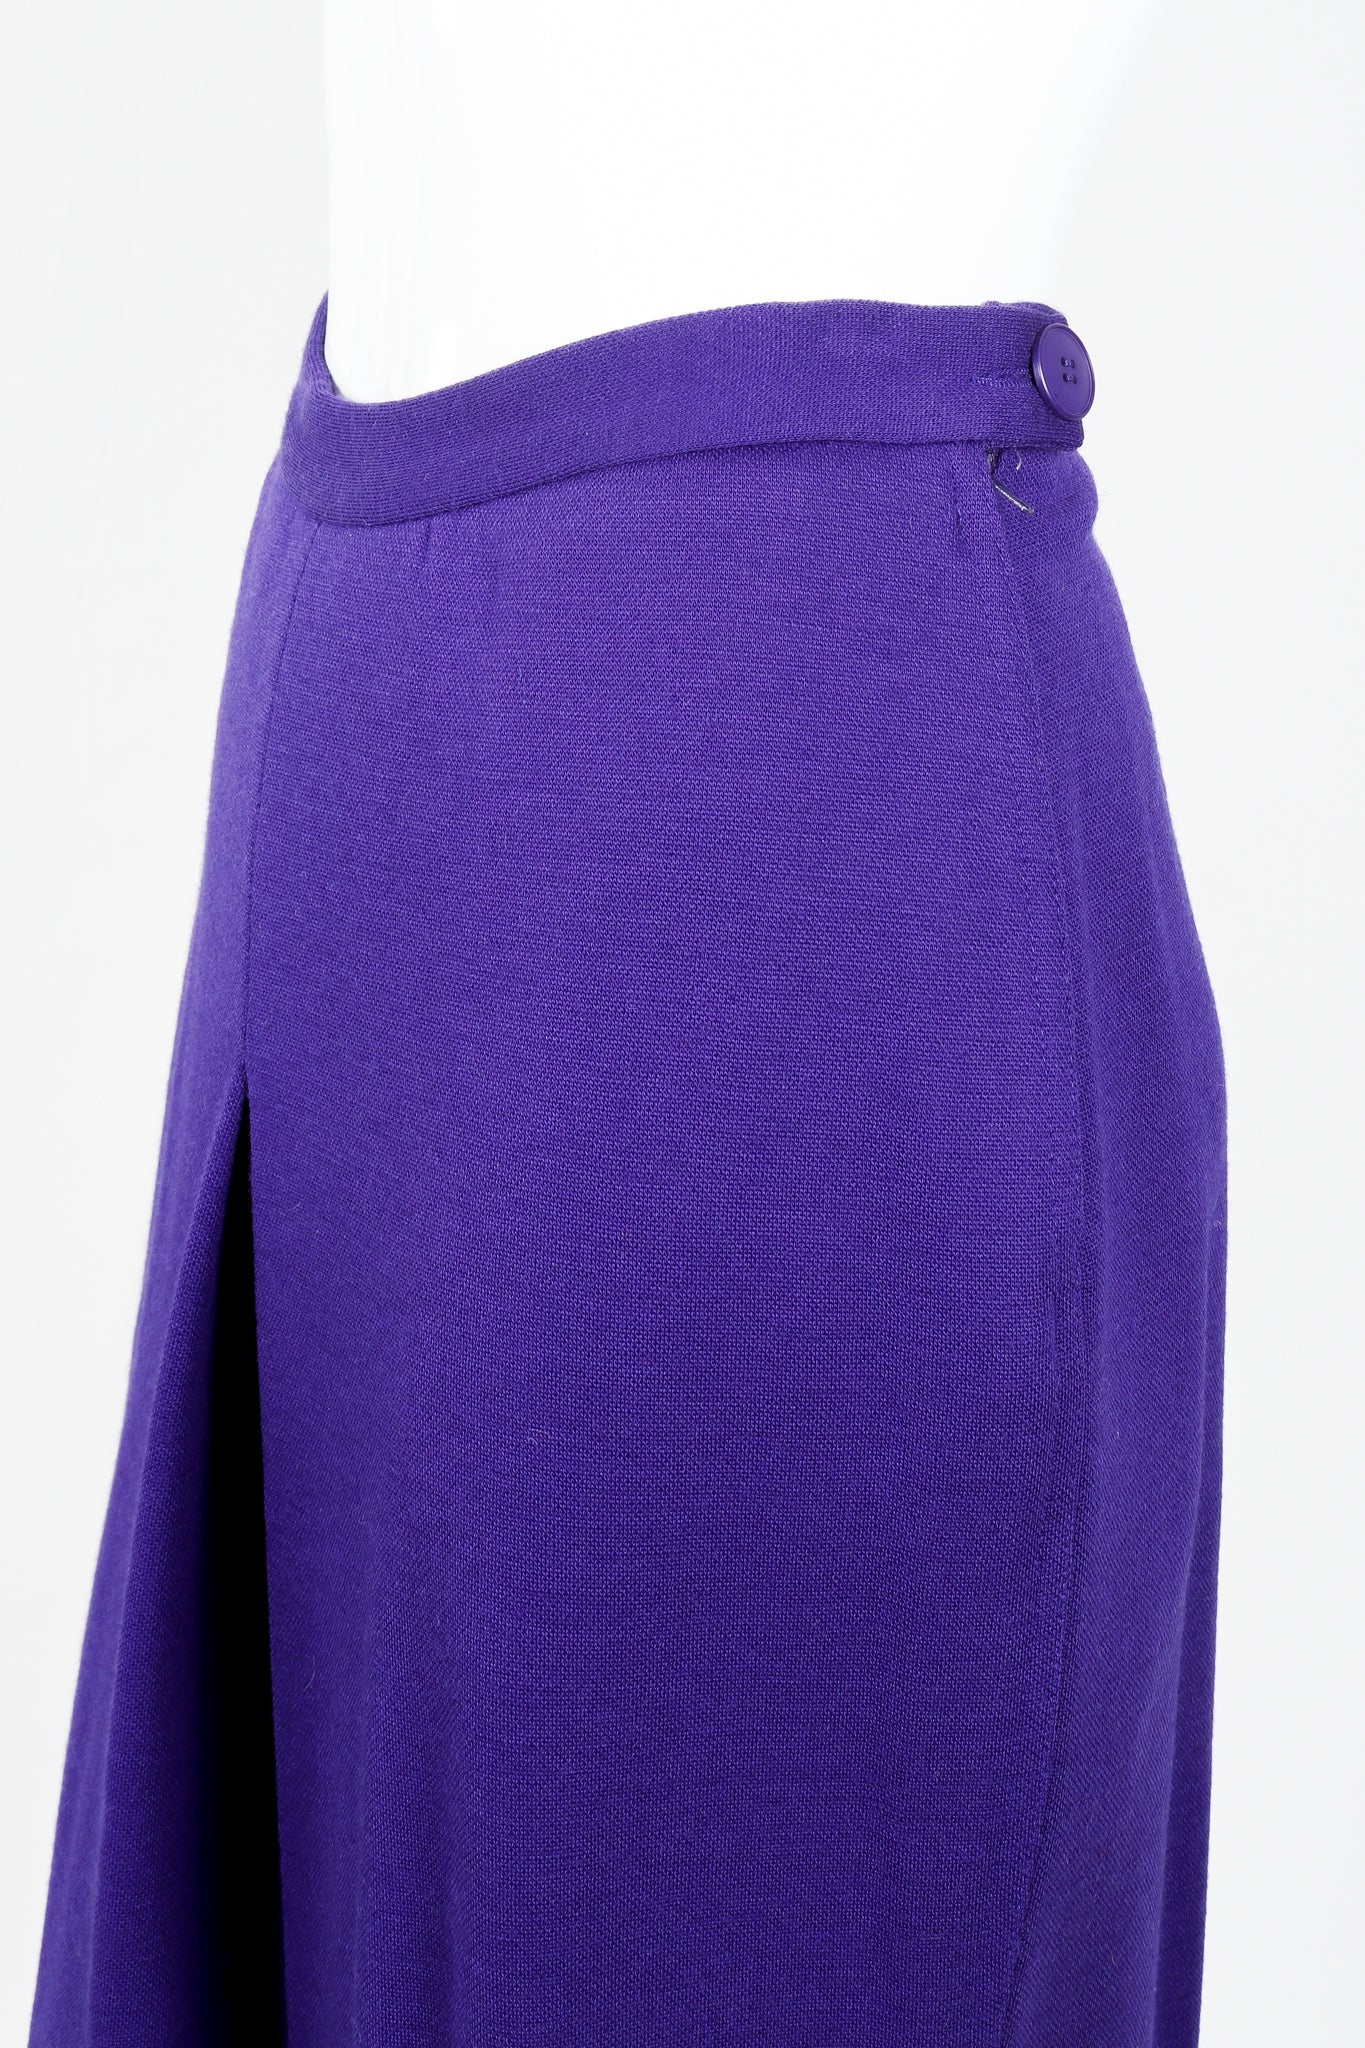 Vintage Sonia Rykiel Purple Knit Relaxed Straight Pant on mannequin waistline at Recess